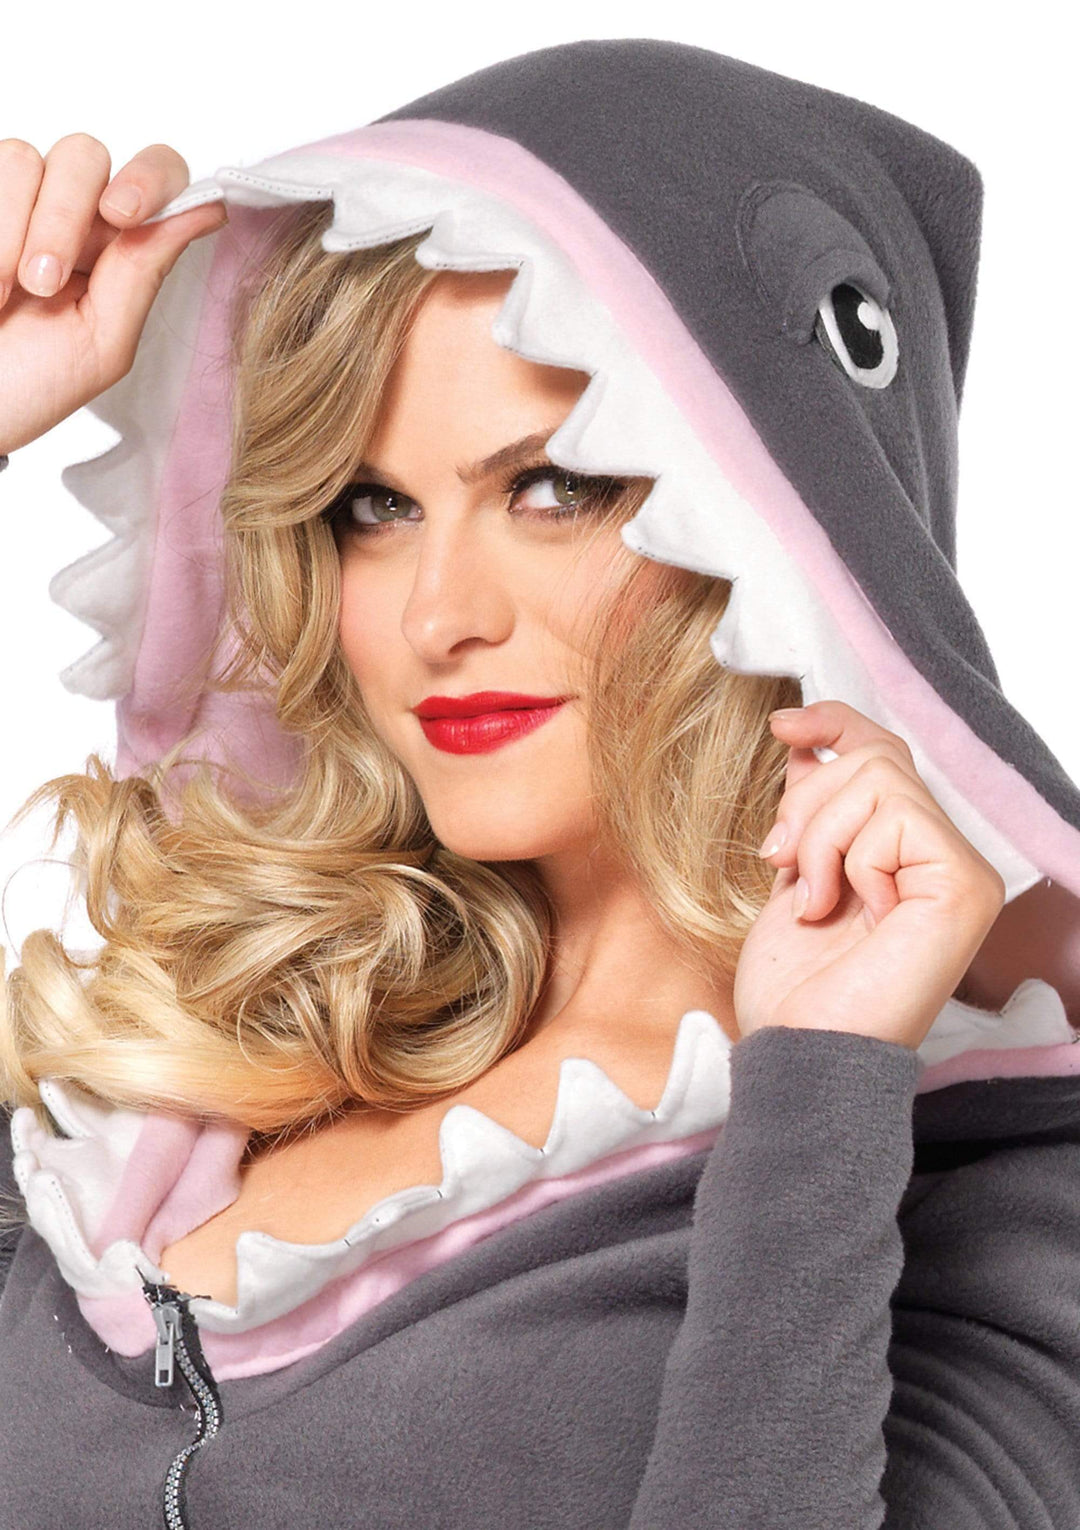 Cozy Shark Mini Dress with Attached Fins and Shark Teeth Hood